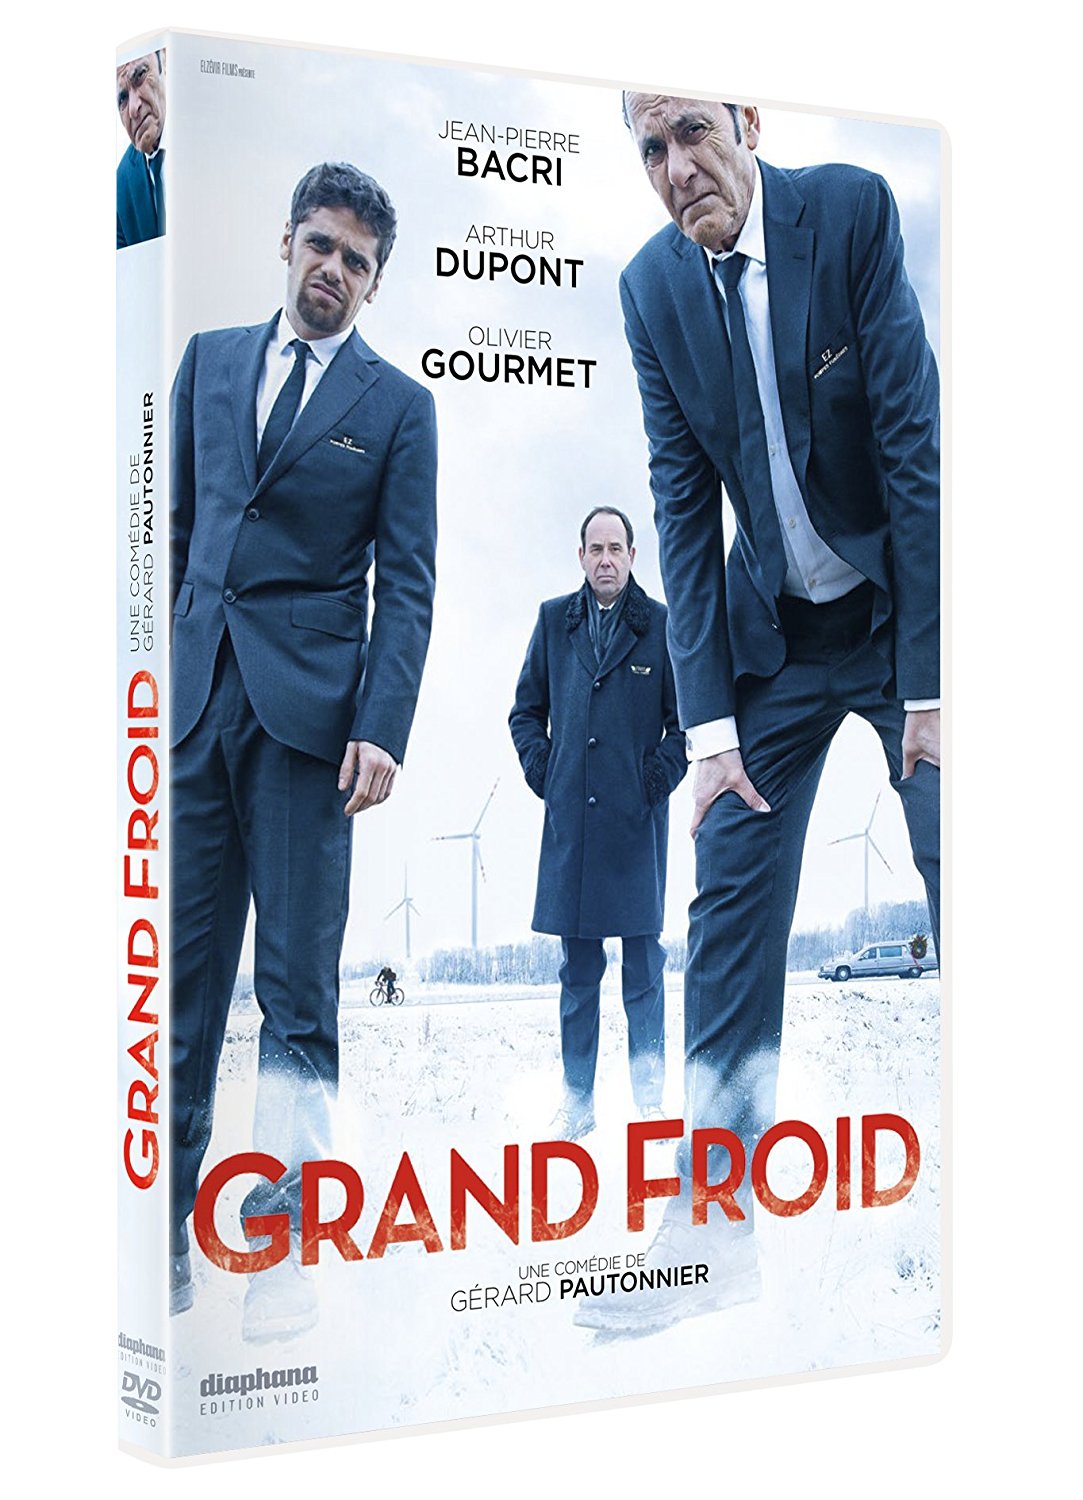 Grand froid image dvd